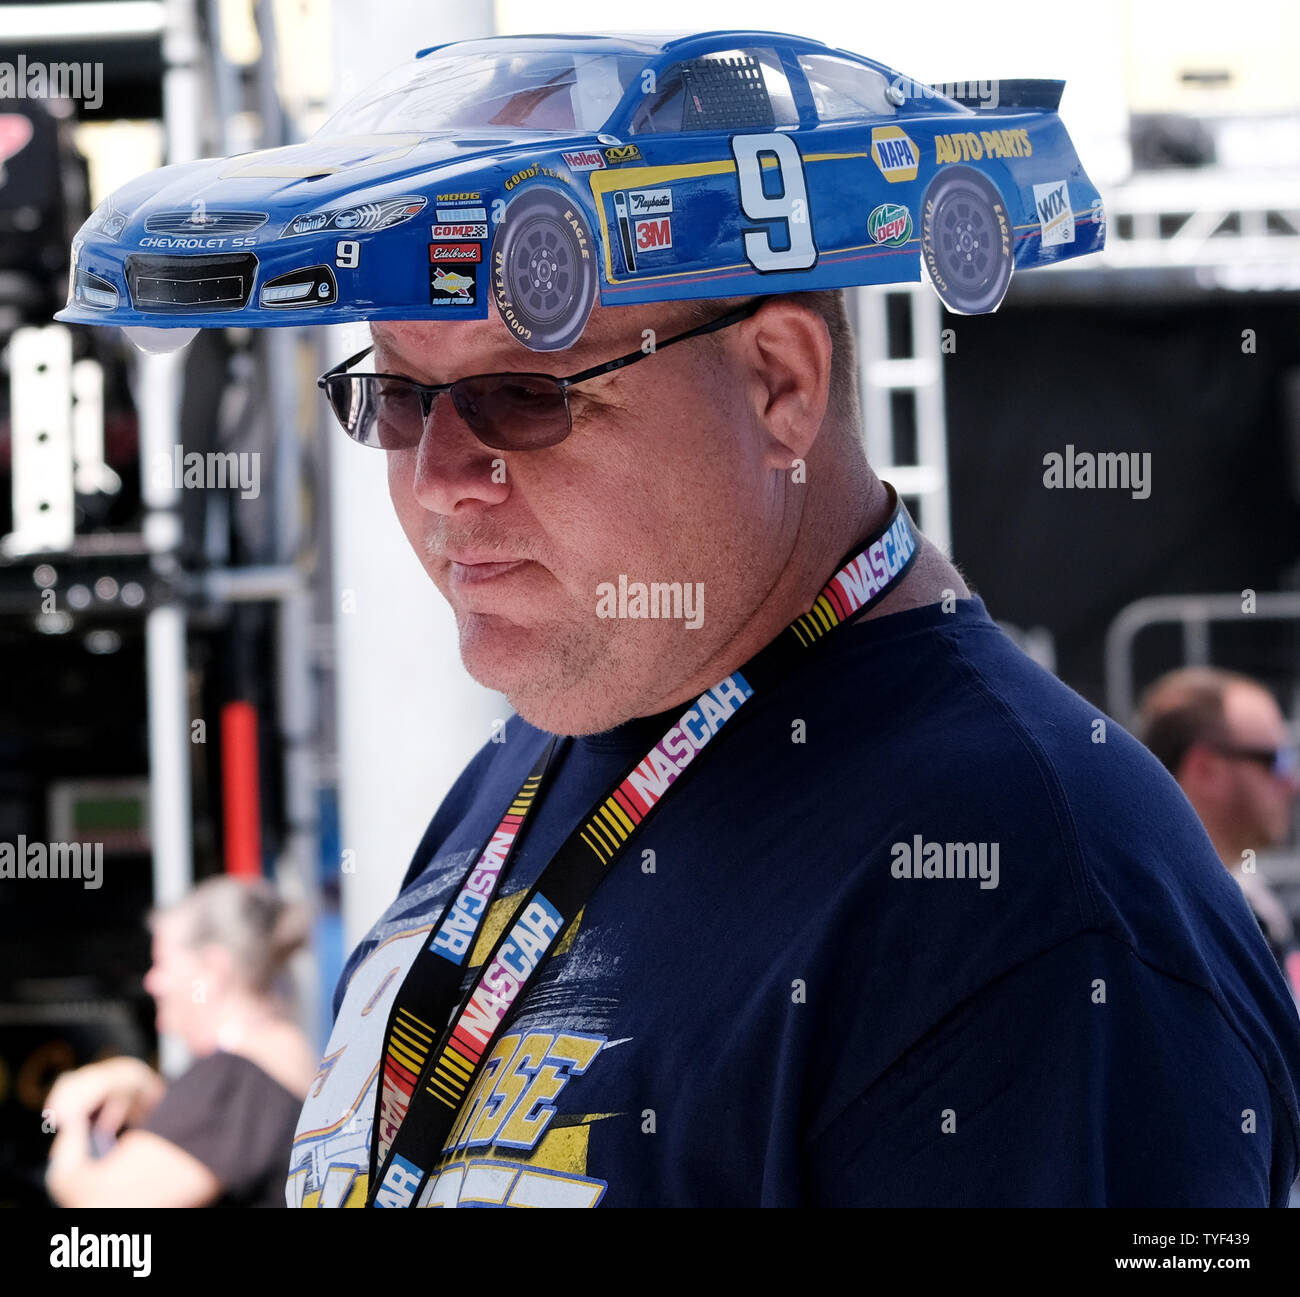 Race fan Mike Waterman wearing a  Chase Elliott (9) car hat walks in the pit area before the start of the NASCAR Cup Series Championship at Homestead-Miami Speedway in Homestead, Florida on November 18, 2018.  Photo By Gary I Rothstein/UPI Stock Photo